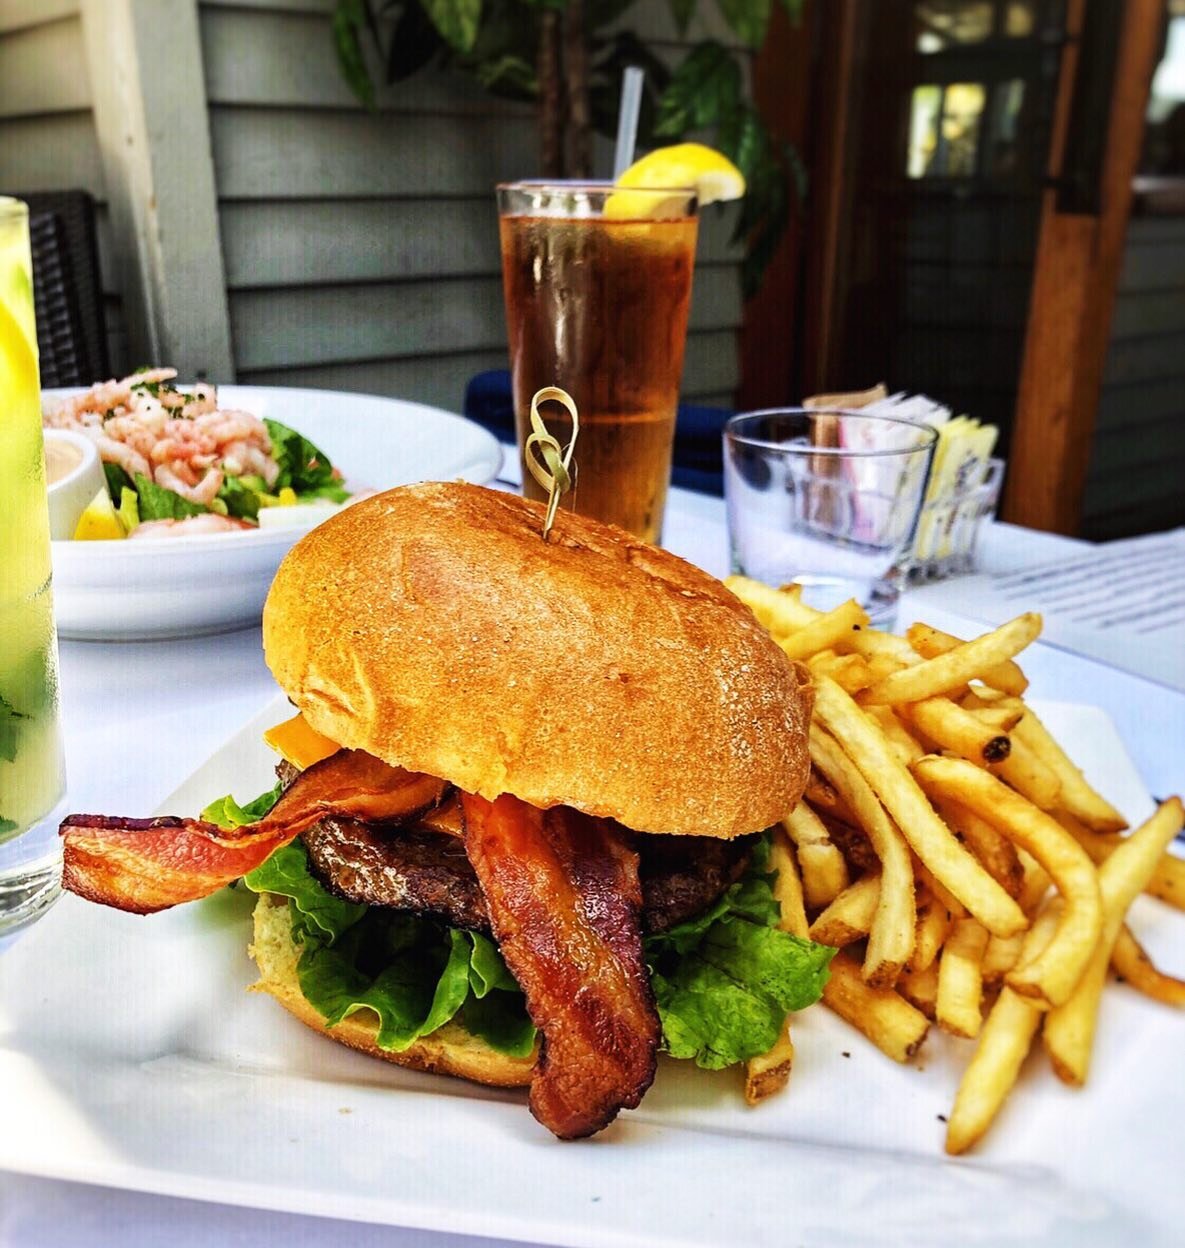 GRASS-FED BISTRO BURGER 🔥
...with added bacon, because let&rsquo;s be real, everything&rsquo;s better with bacon! #mistralrws